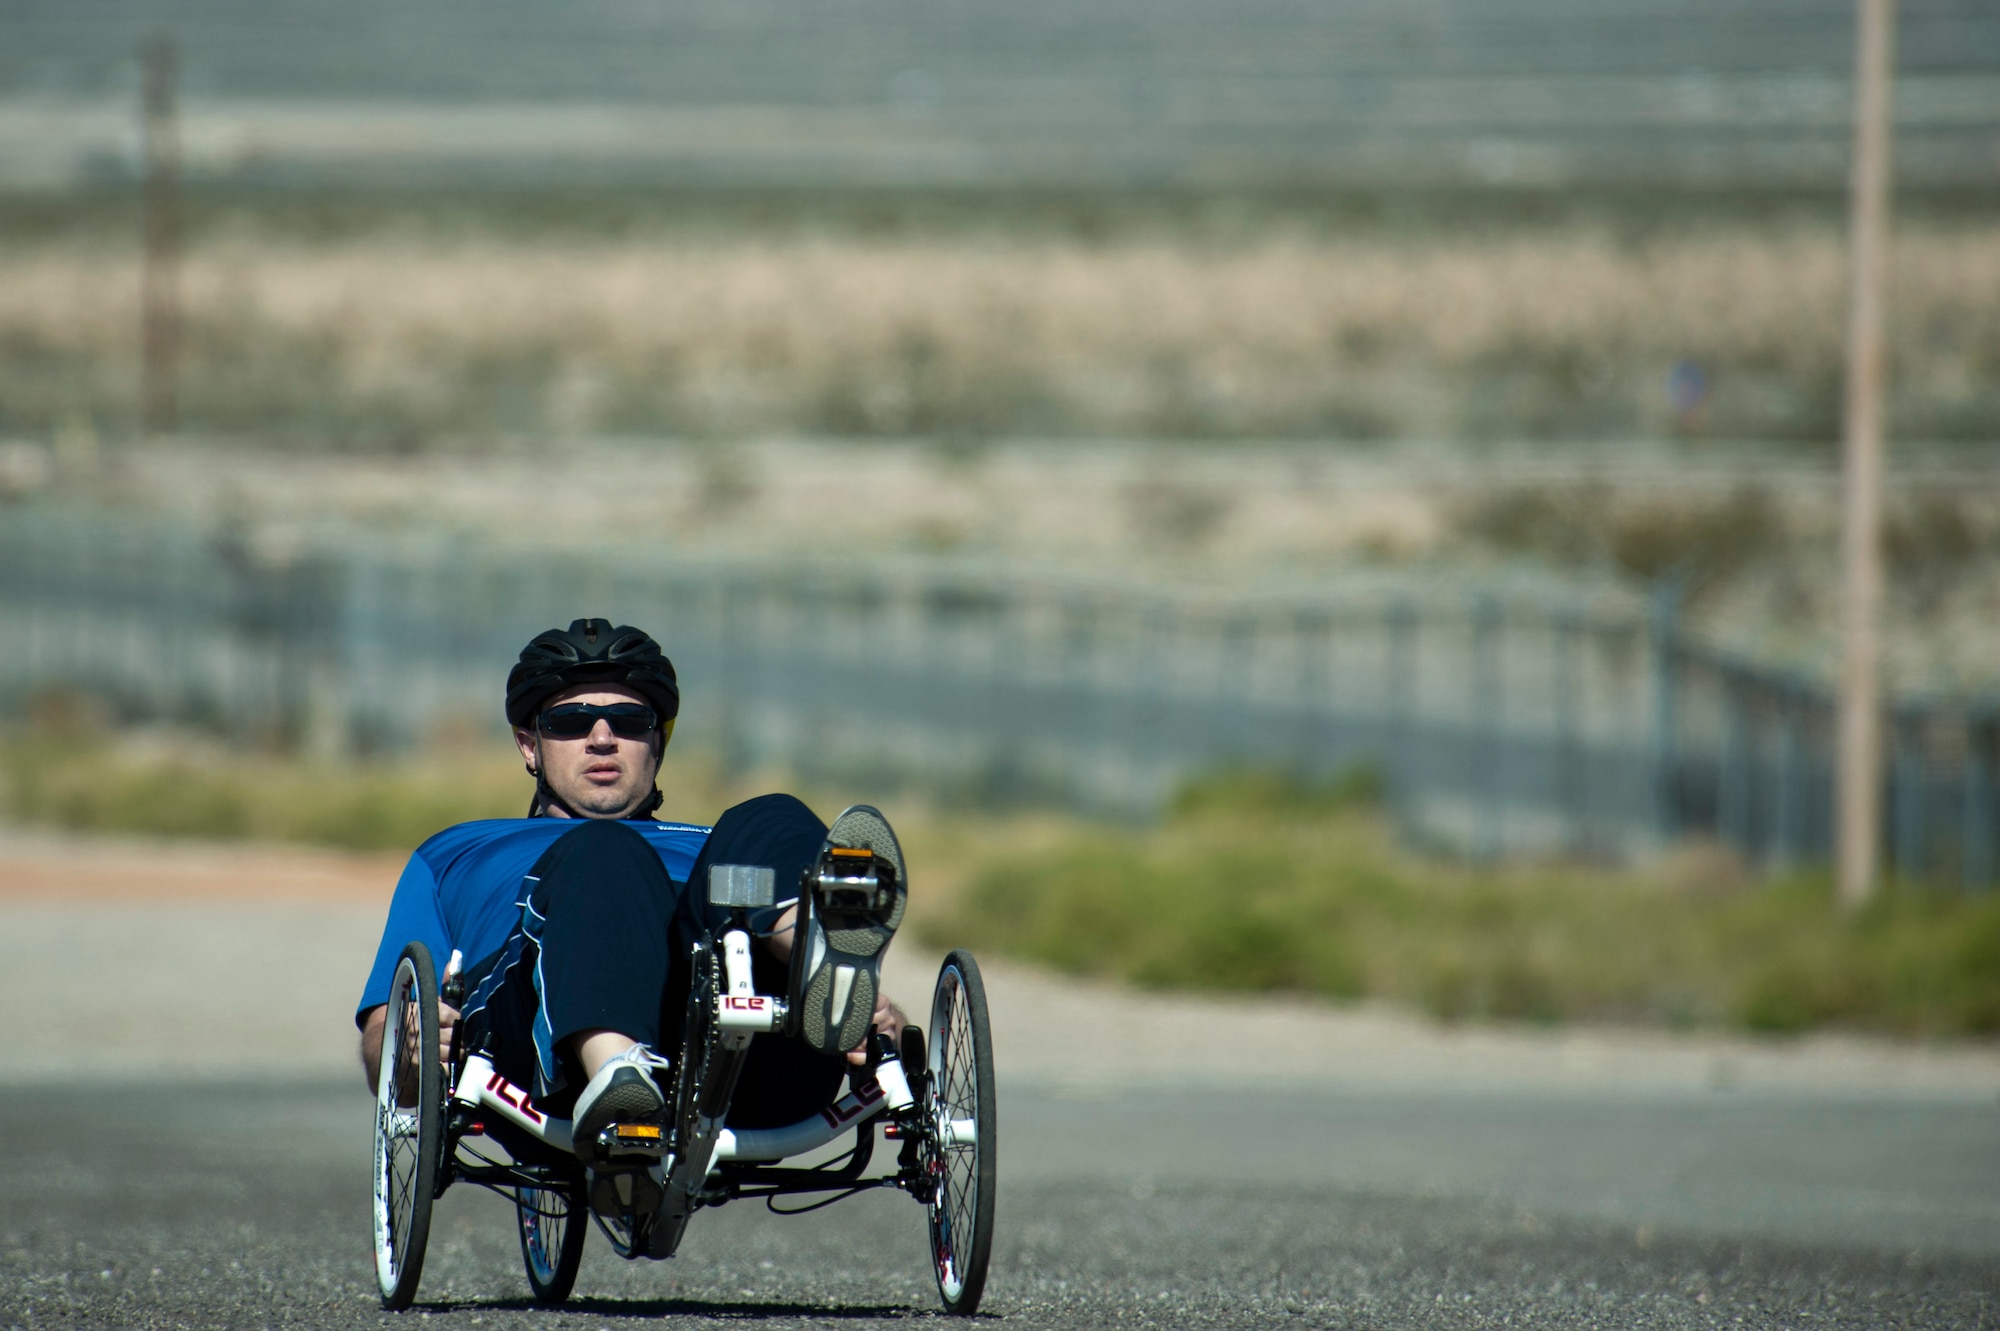 Ryan Delaney peddles across a parking lot to test a newly adjusted bike during a cycling fitting session Feb. 26, 2015, at Nellis Air Force Base, Nev. Service members are participating in adaptive athletic reconditioning for lasting effects on physical and emotional recovery. Delaney is a 2015 U.S. Air Force Trials cycling team member. (U.S Air Force photo/Senior Airman Timothy Young)